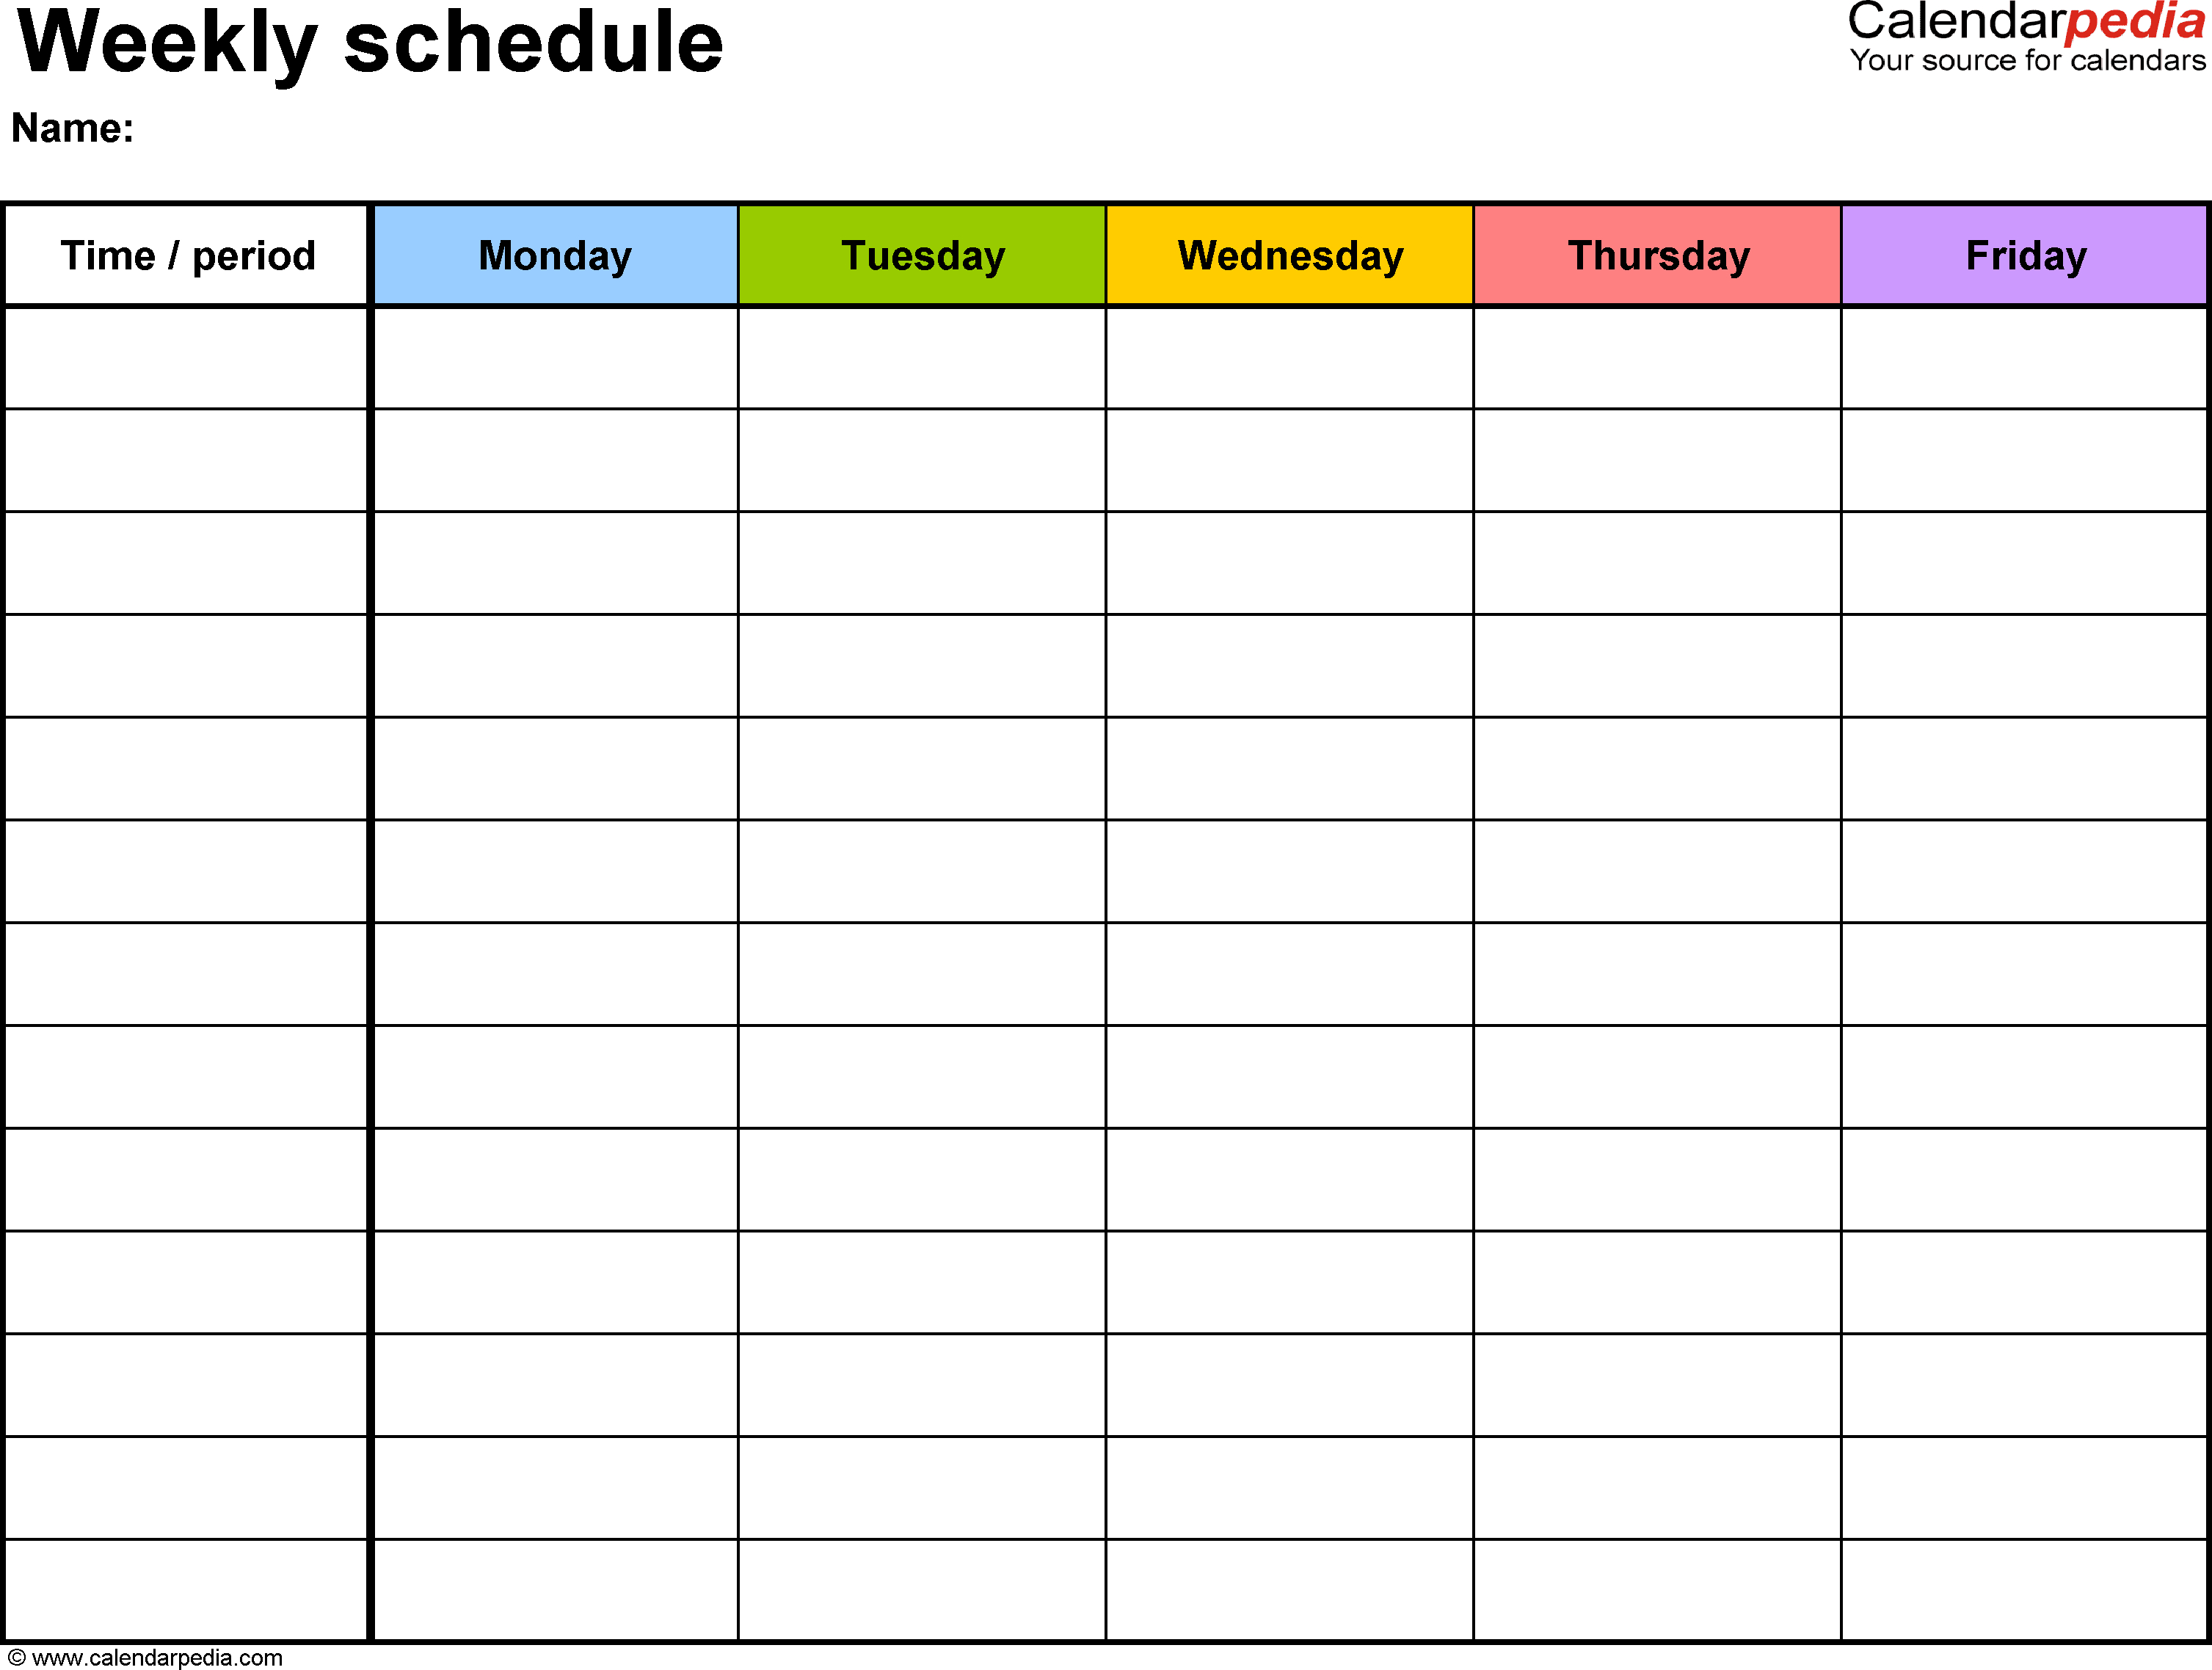 Roster Spreadsheet Template Free For Free Weekly Schedule Templates For Excel  18 Templates